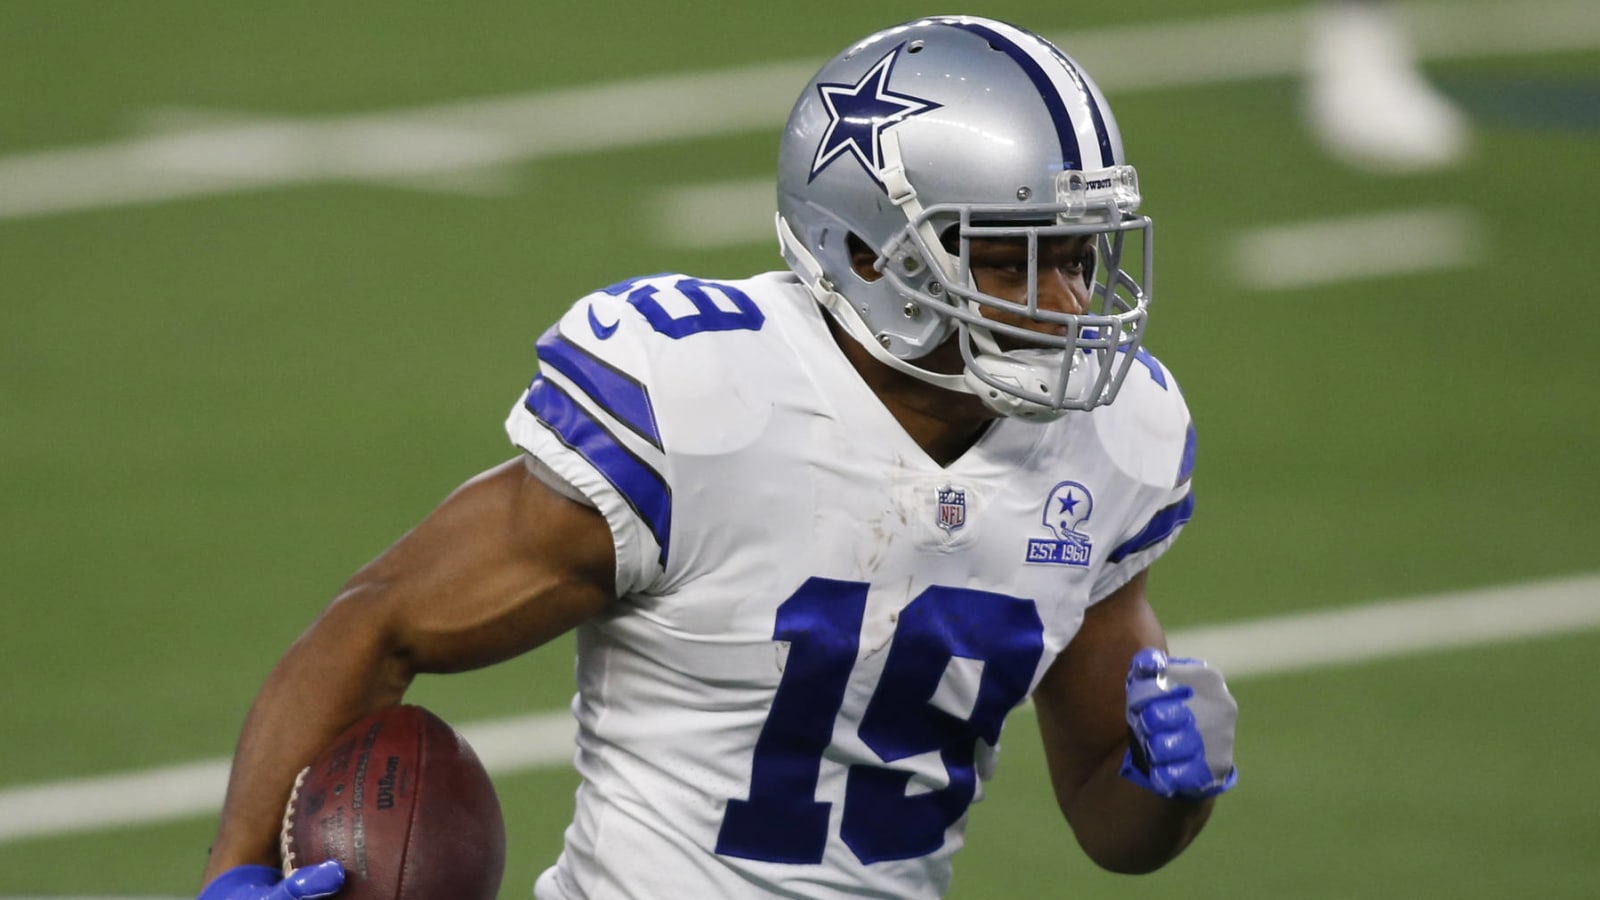 Amari Cooper could miss start of training camp with ankle injury